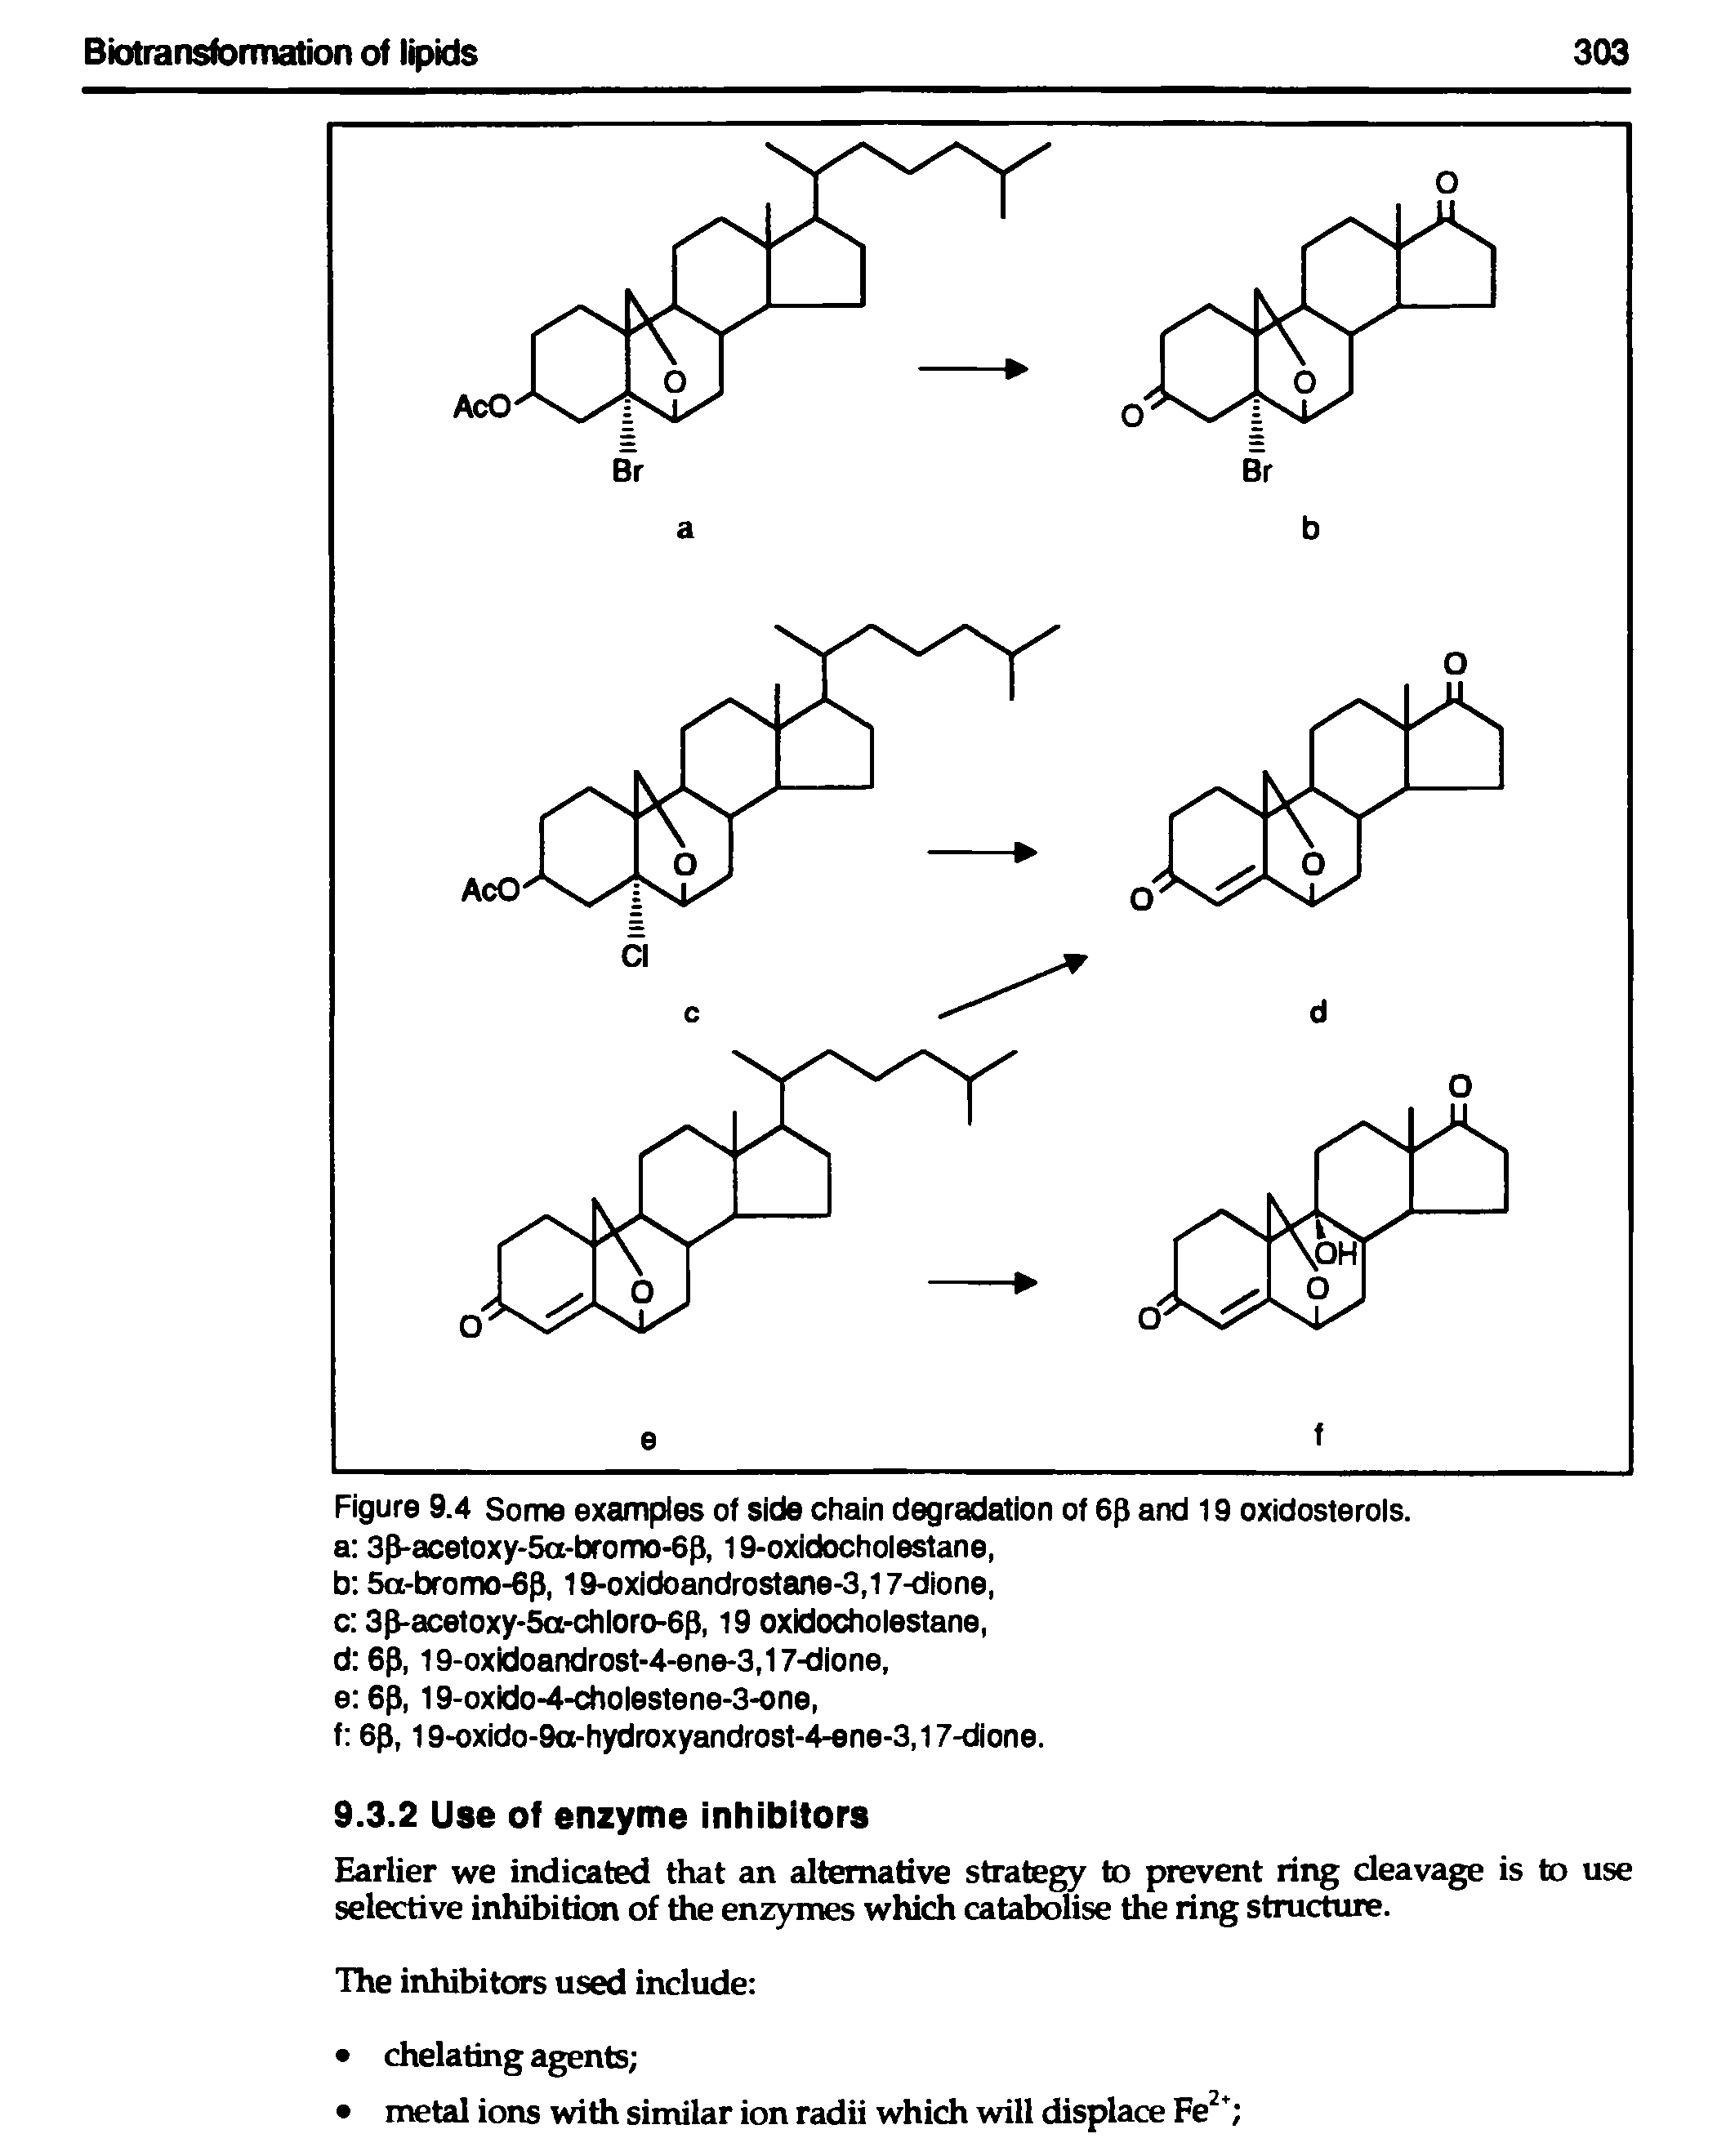 Figure 9.4 Some examples of side chain degradation of 6f) and 19 oxidosterols.